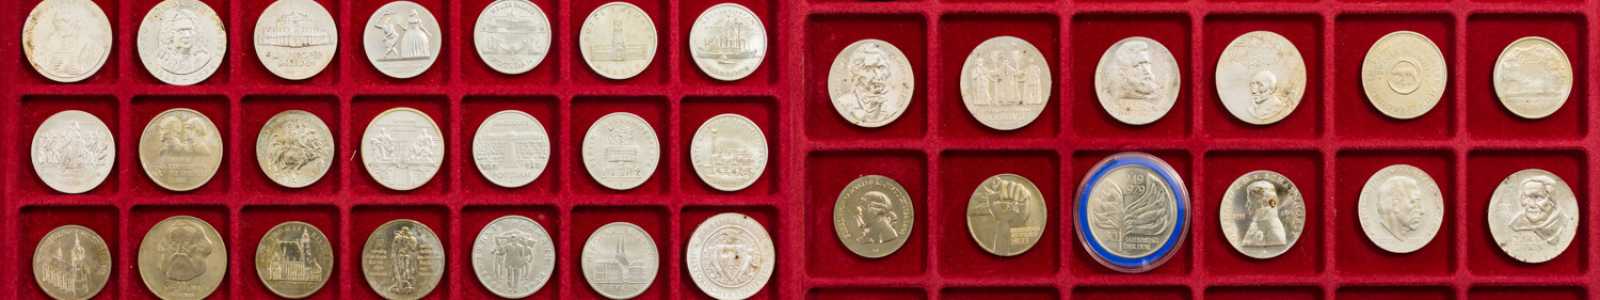 Coins, Medals, Stamps